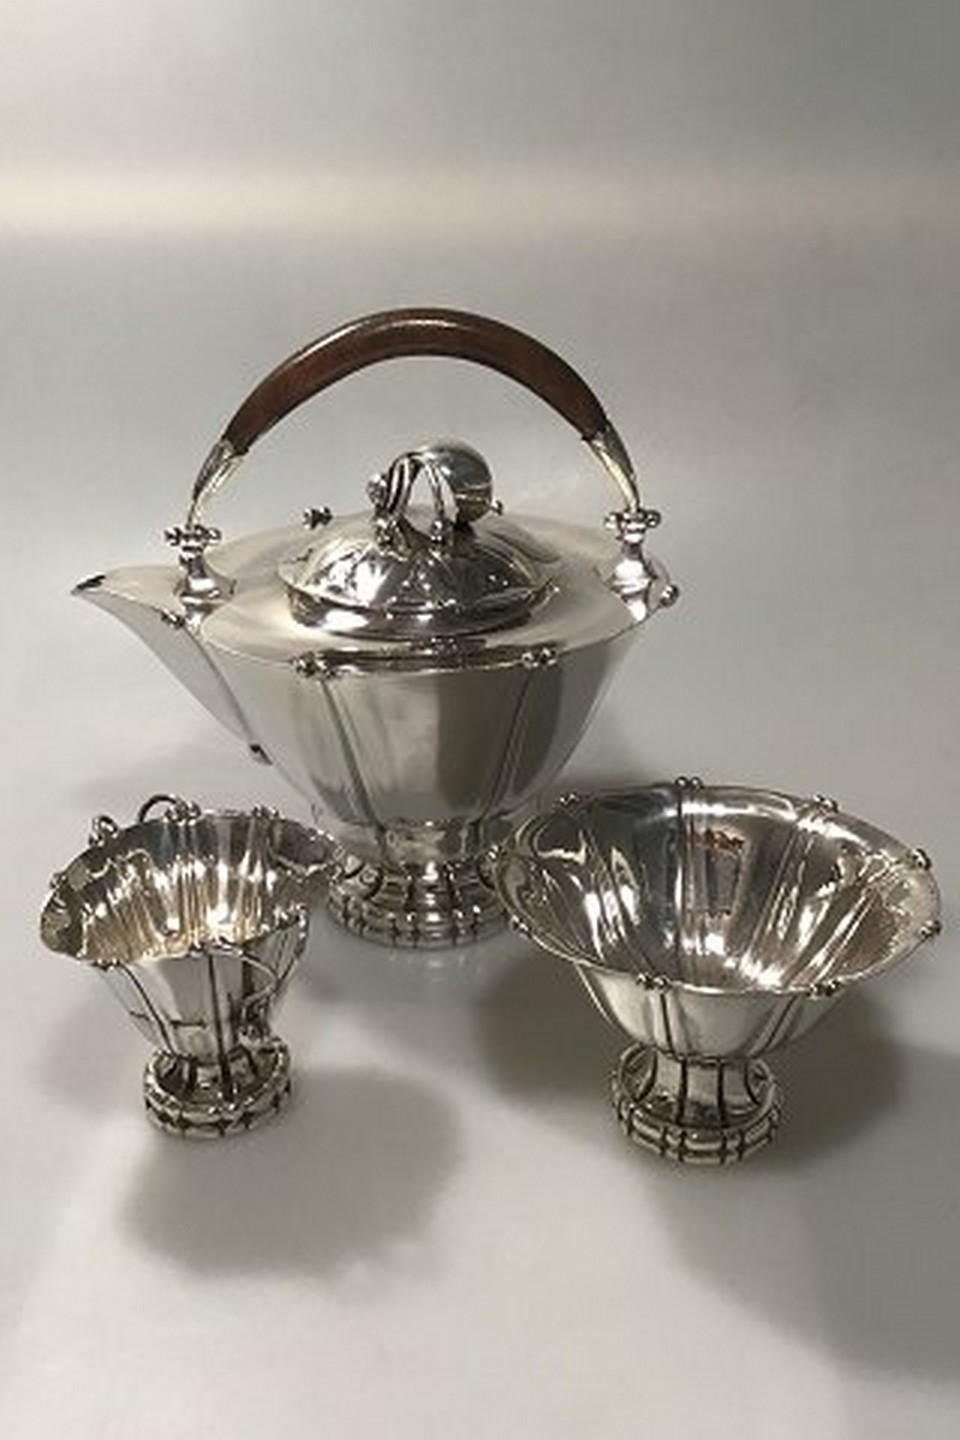 Hand-Painted Georg Jensen Silver/Sterling Silver Tea Set No. 4 Creamer No. 4, '1915-1927'[ For Sale